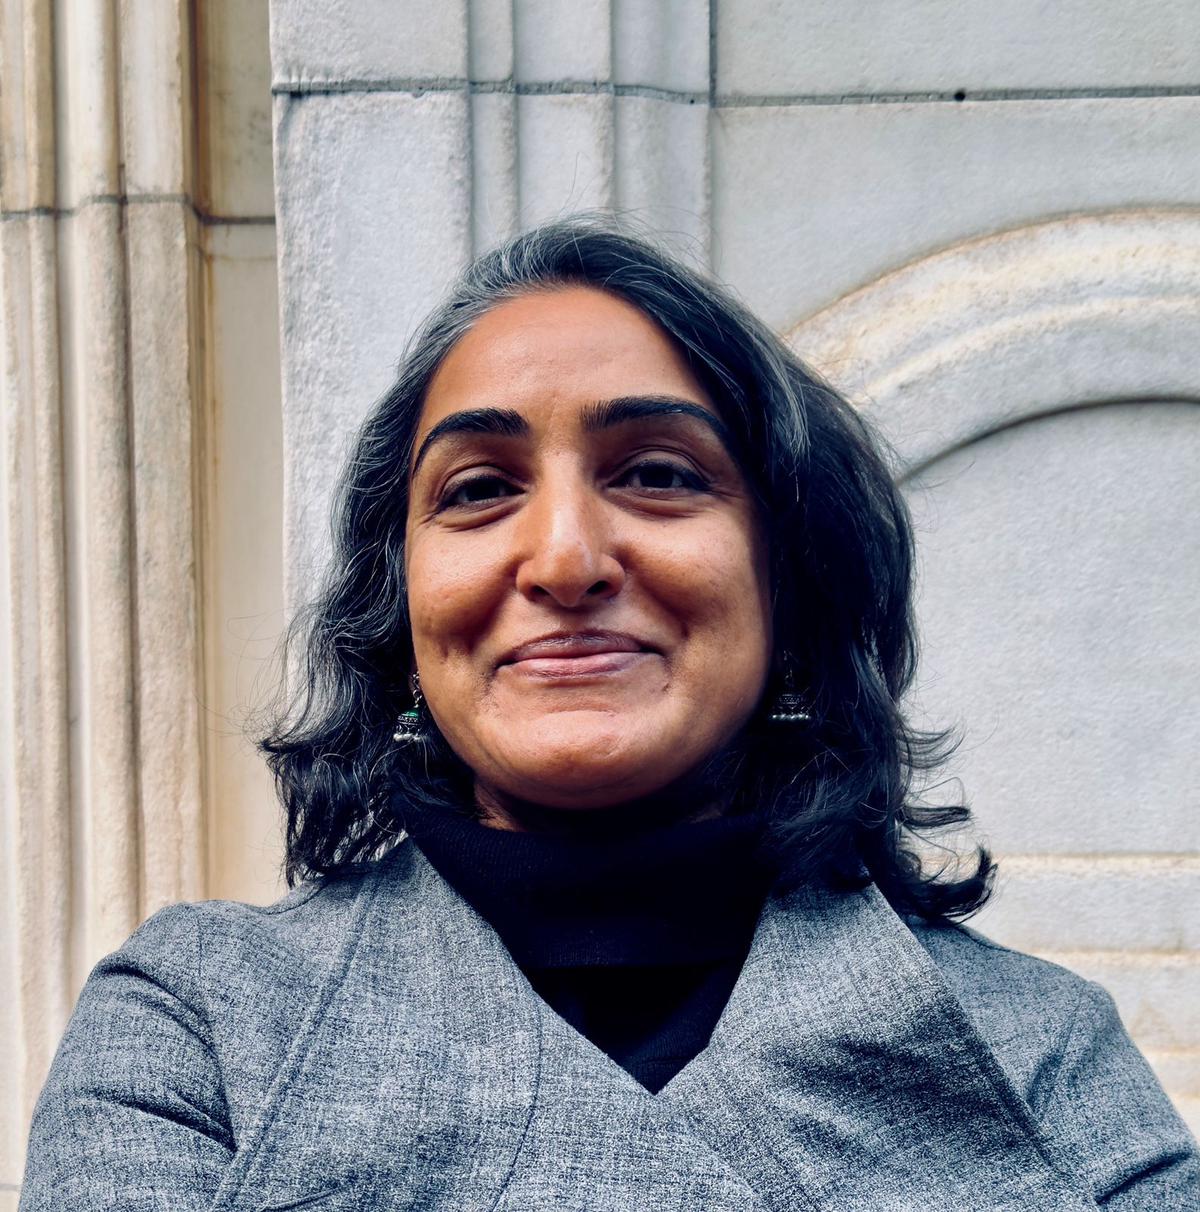 Karuna Mantena, winner of the Infosys Prize 2023 in Social Sciences, is a professor of Political Science at Columbia University.